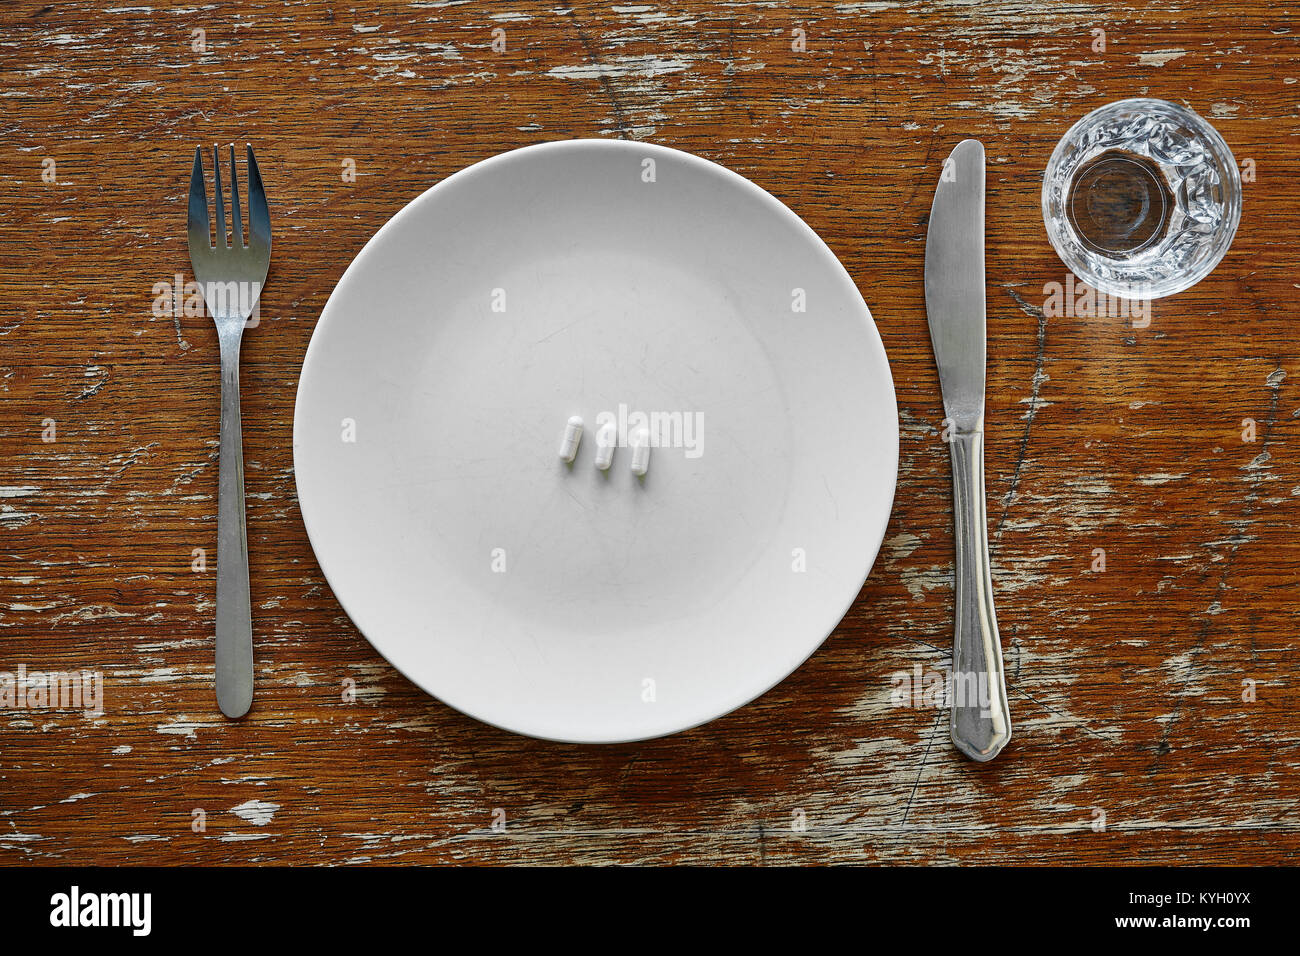 three pills on plate knife and fork Stock Photo